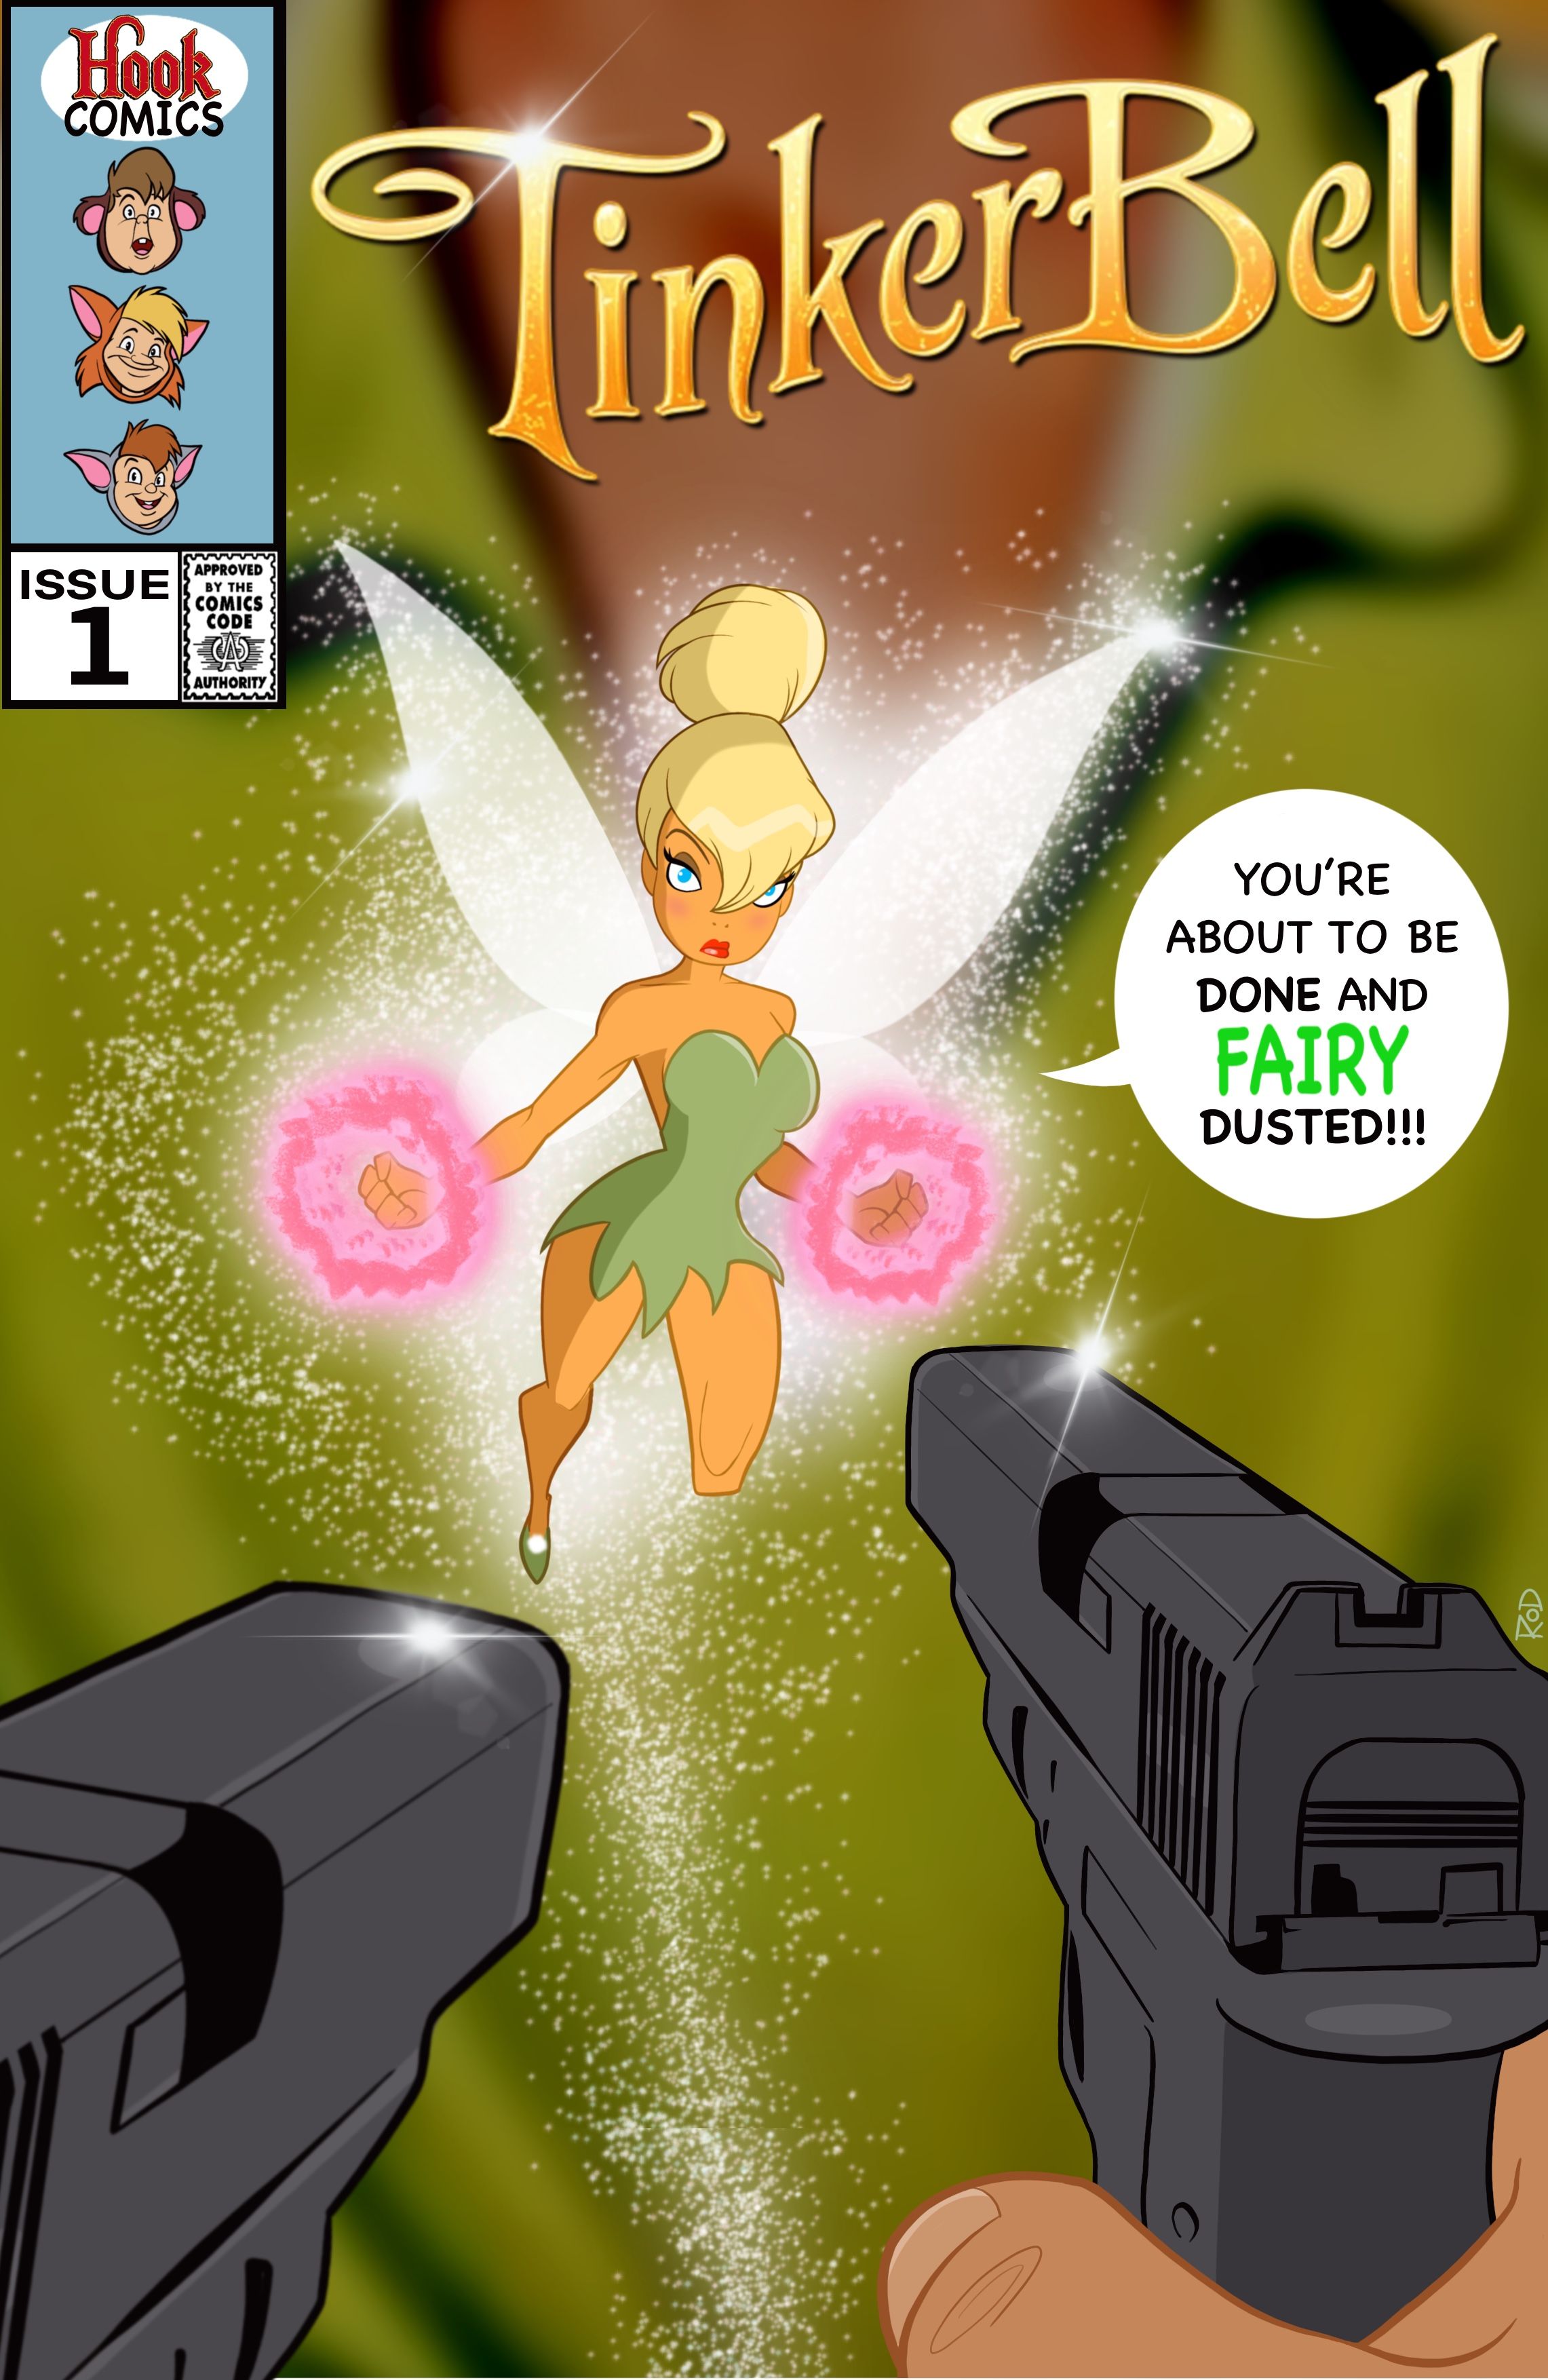 A Tinker Bell homage of Avengers #340